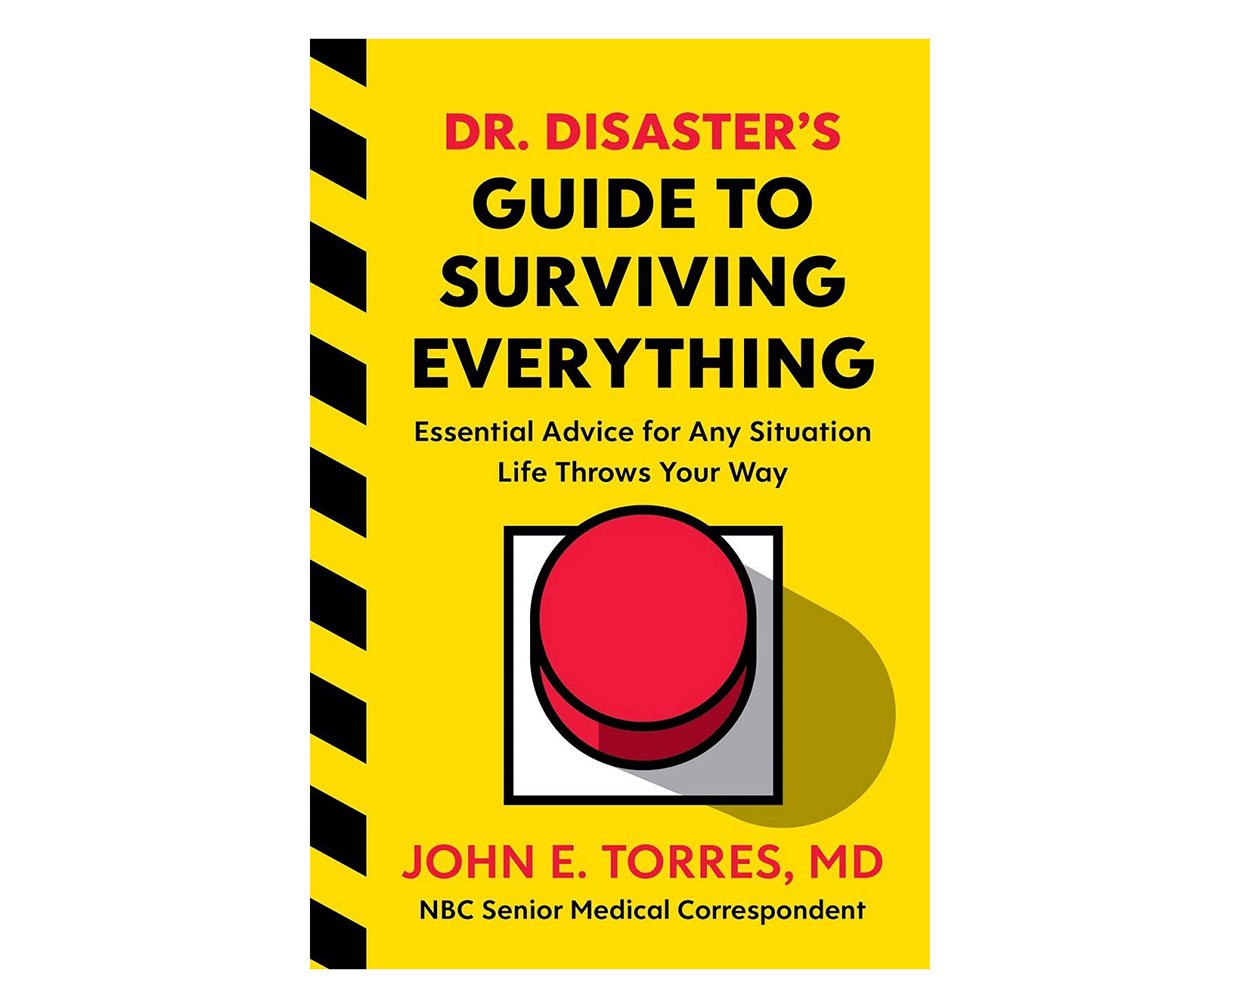 Dr. Disaster’s Guide to Surviving Everything